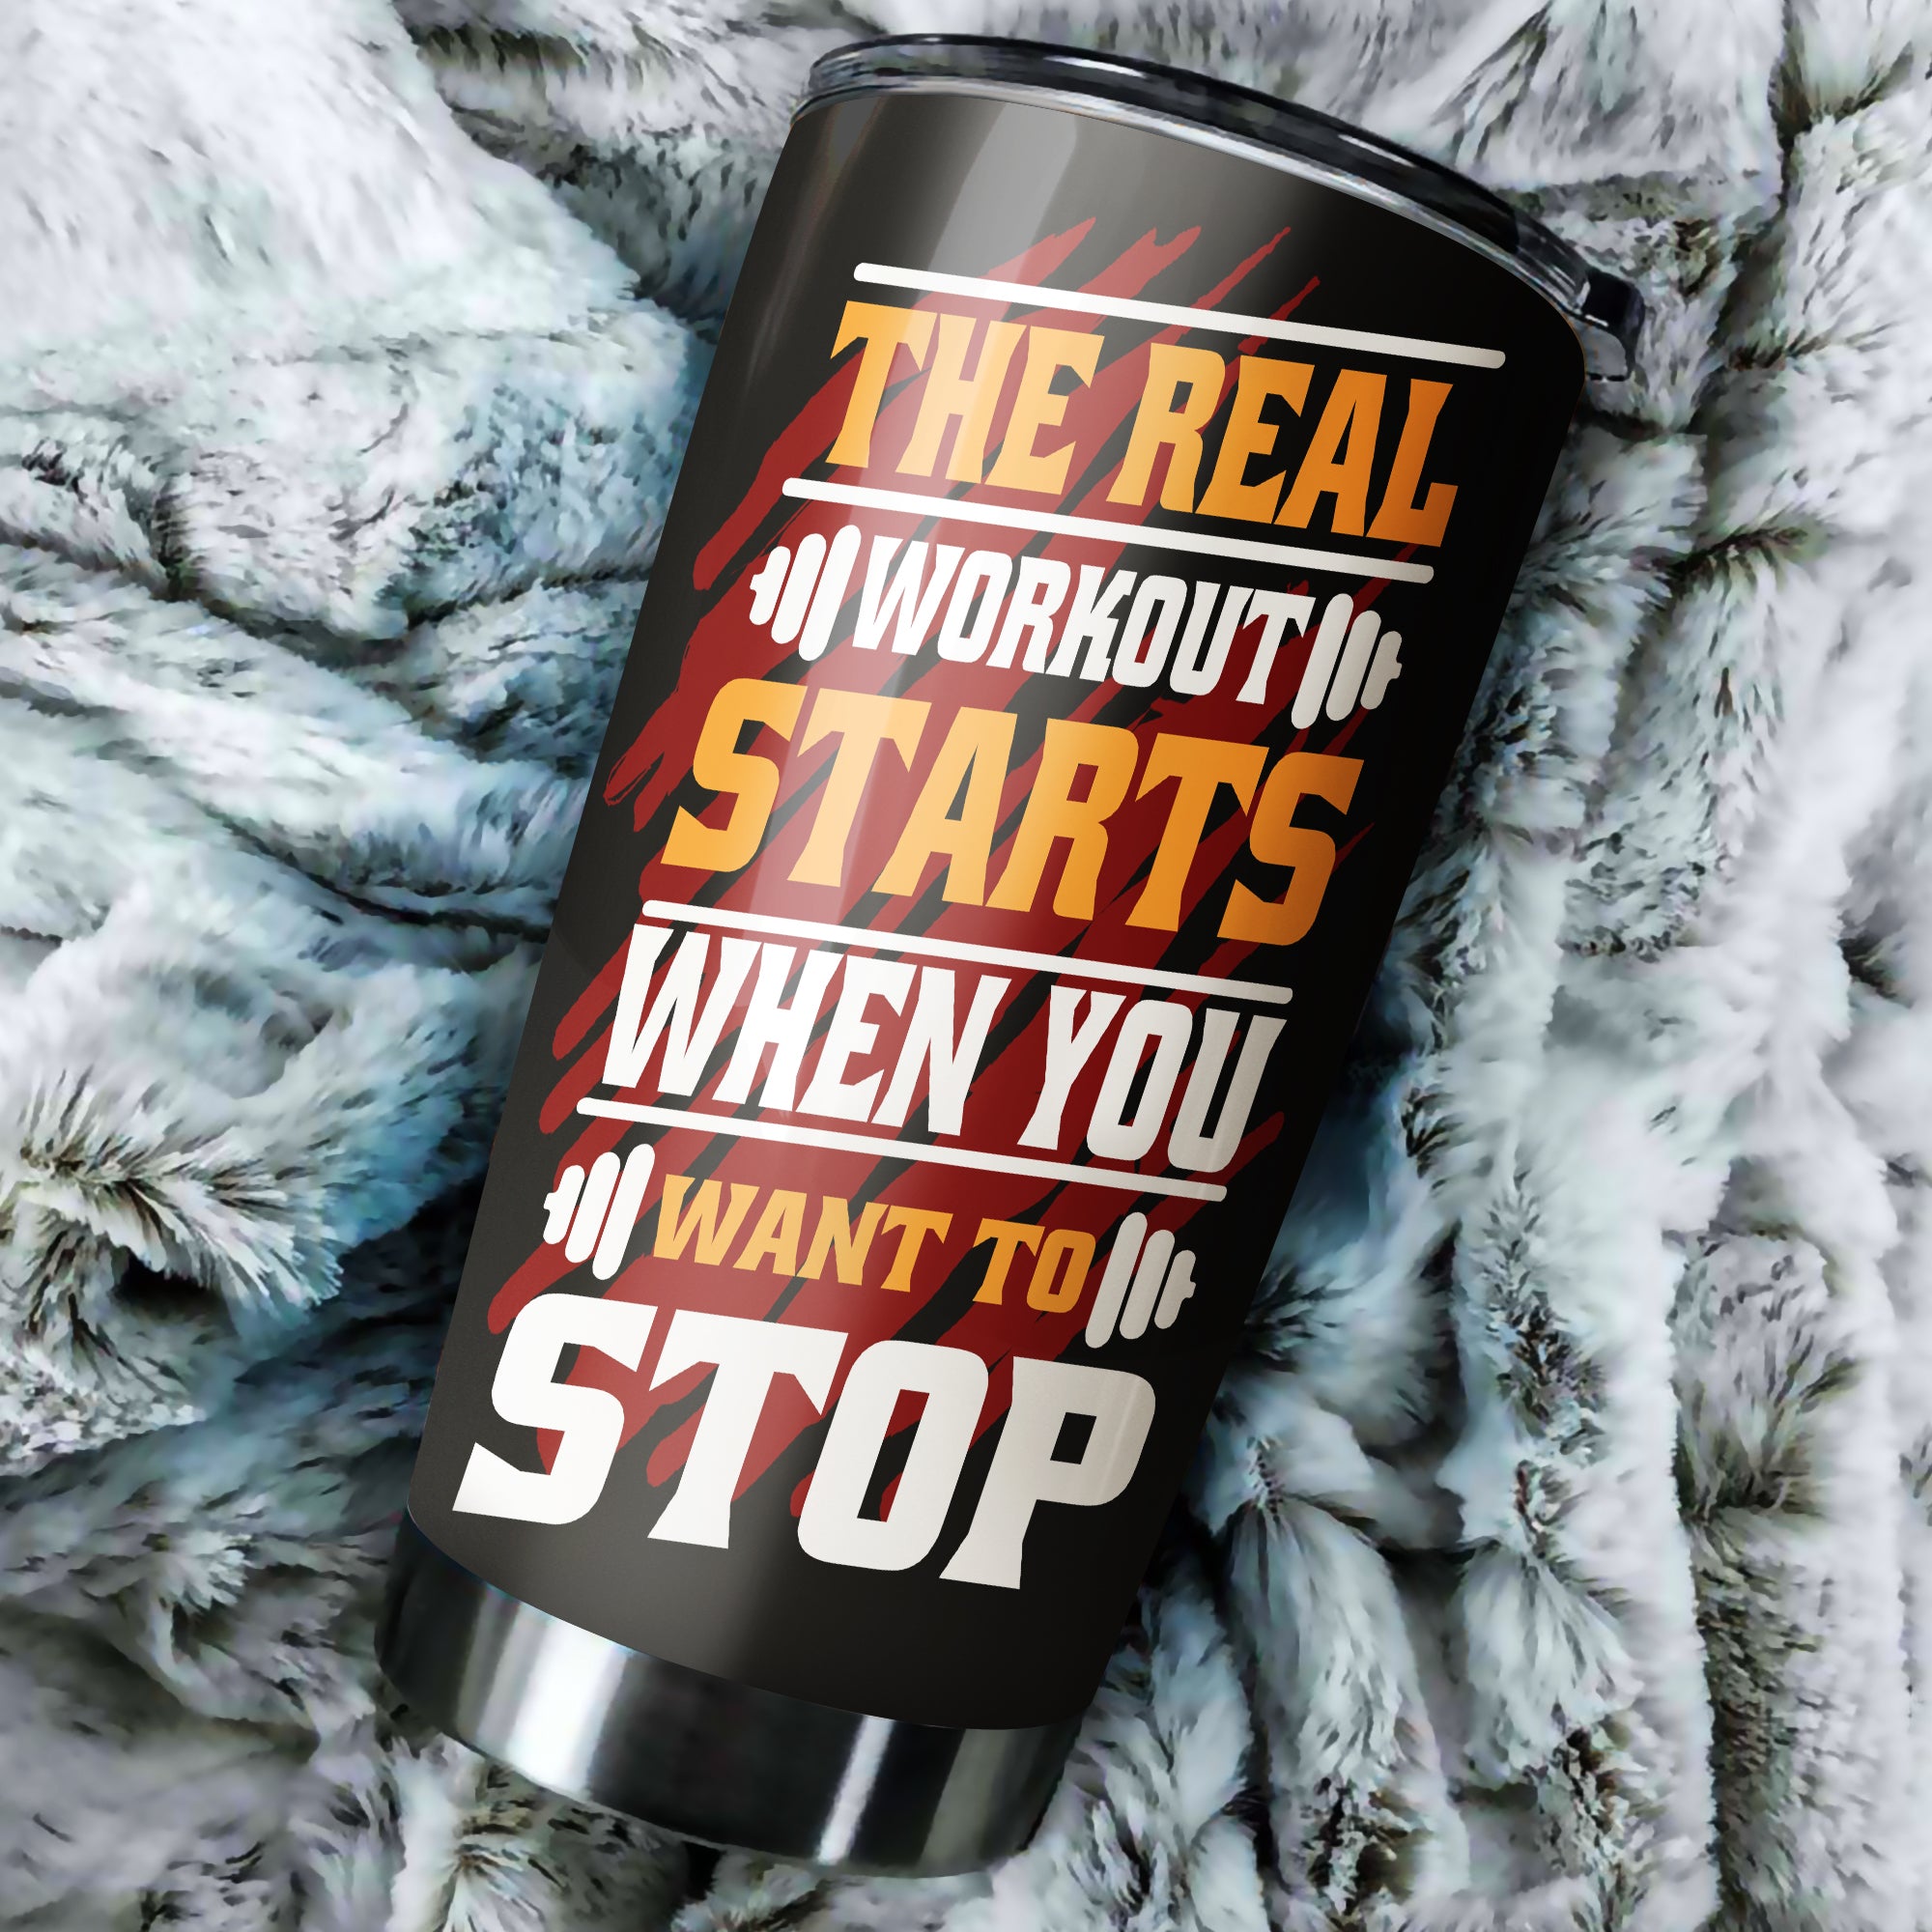 Order your new Beast Tumbler today and Get 15% Off as part of our